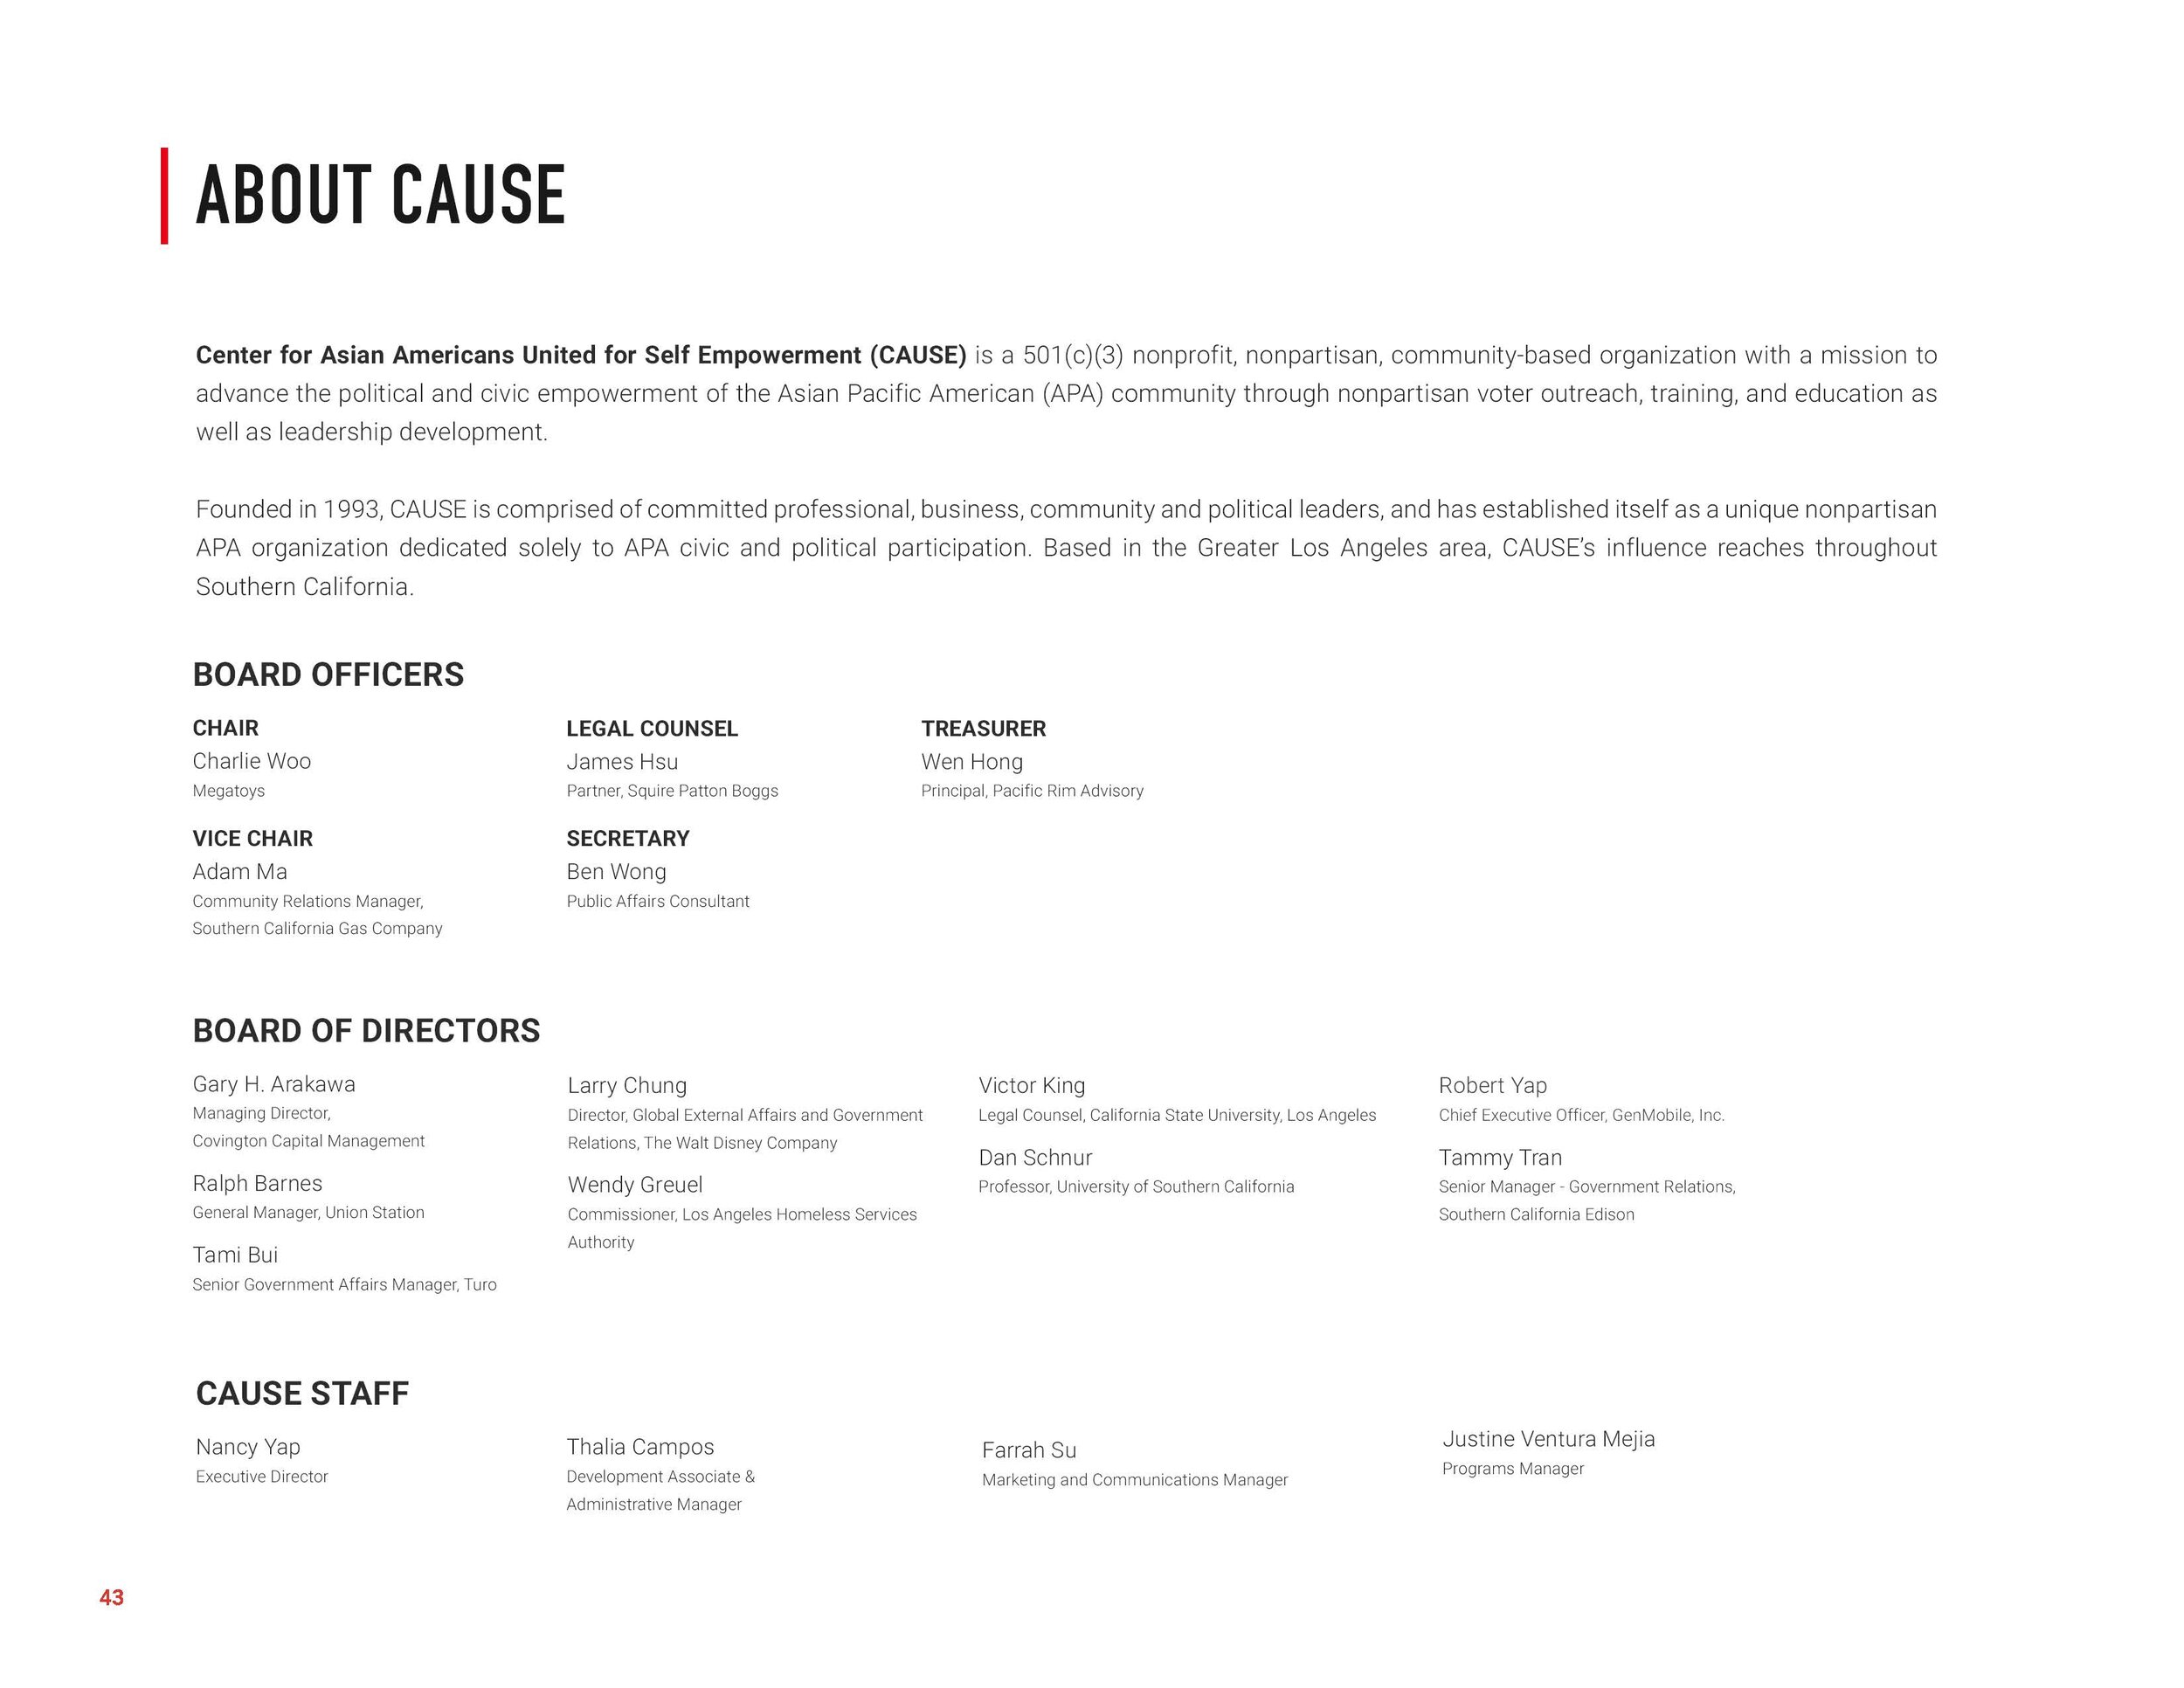 2021-02-11_CAUSE Annual Report - Version08_Page_44.jpg